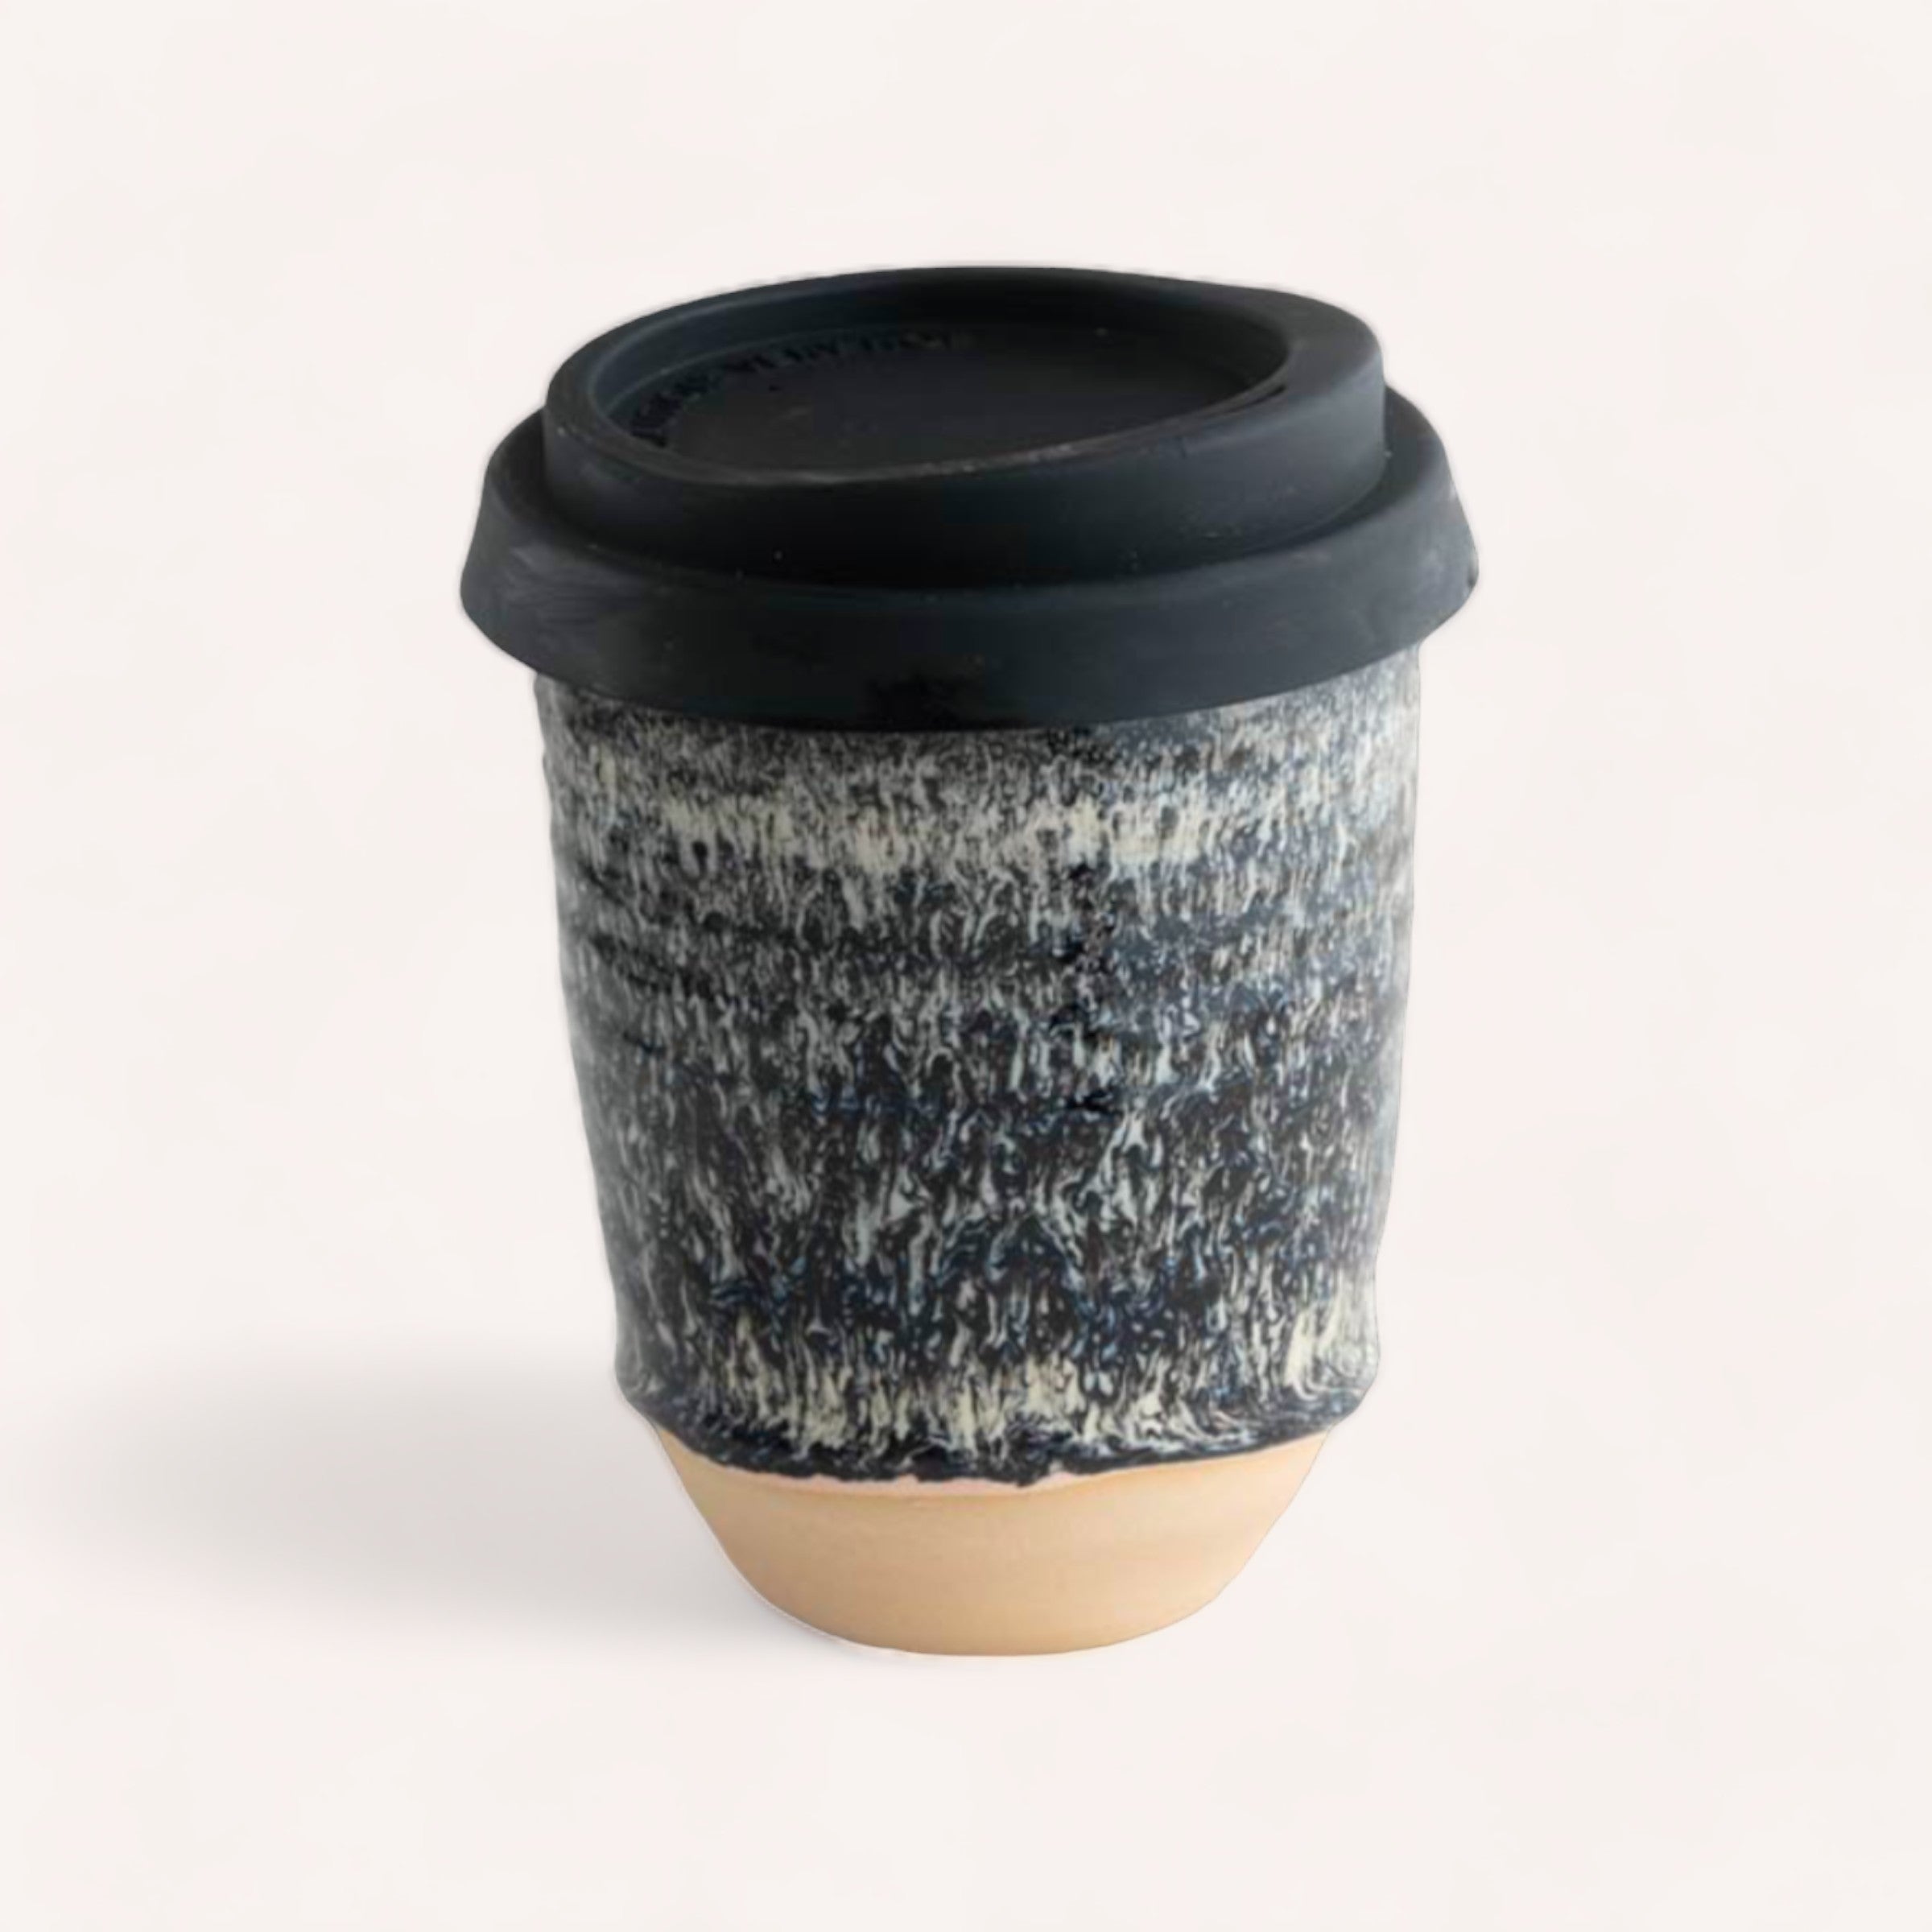 A stylish handcrafted Ceramic Keep Cup by Sam Mayell sporting a textured black and white design, made from NZ sourced stoneware by Queenstown pottery, with a black lid, placed against a neutral background.